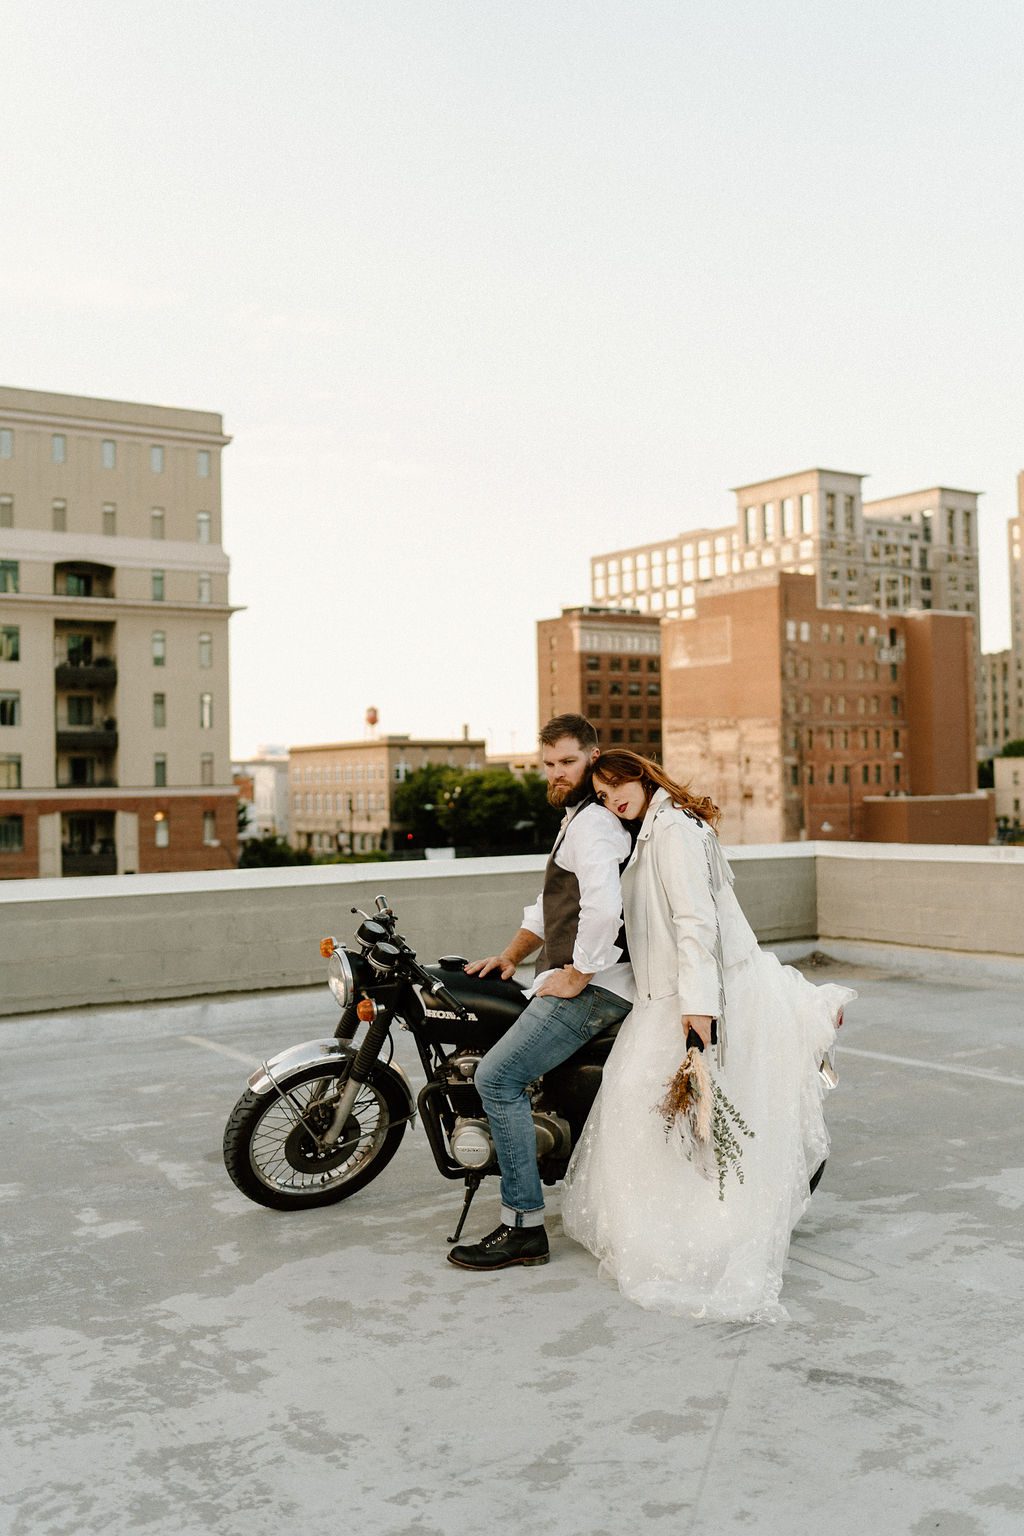 fun urban city elopement With Motorcycle